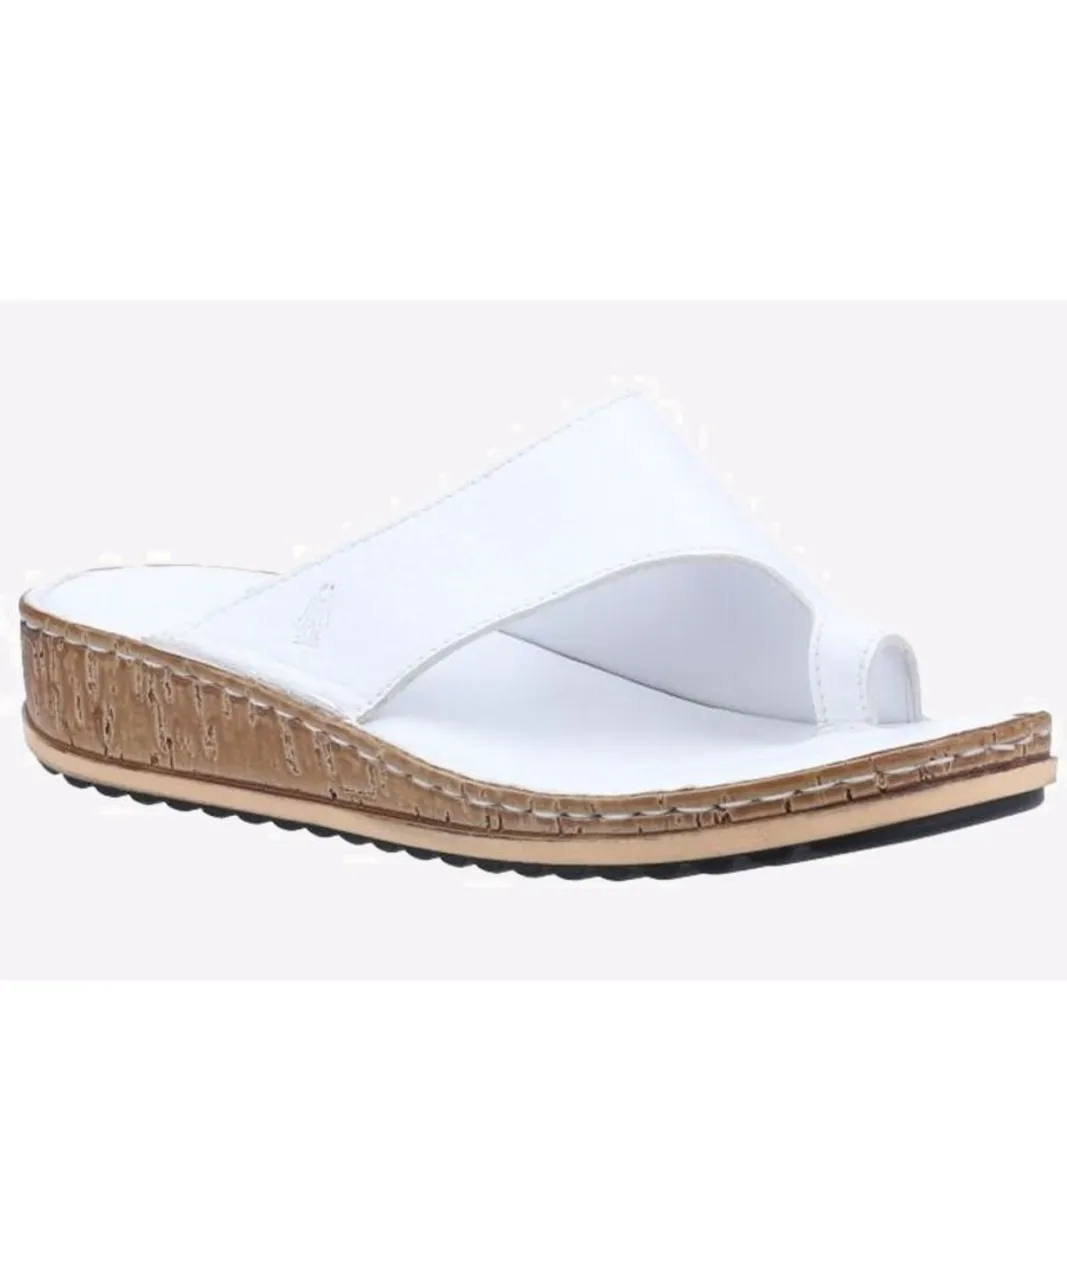 Hush Puppies Elissa Leather Sandals Womens - White